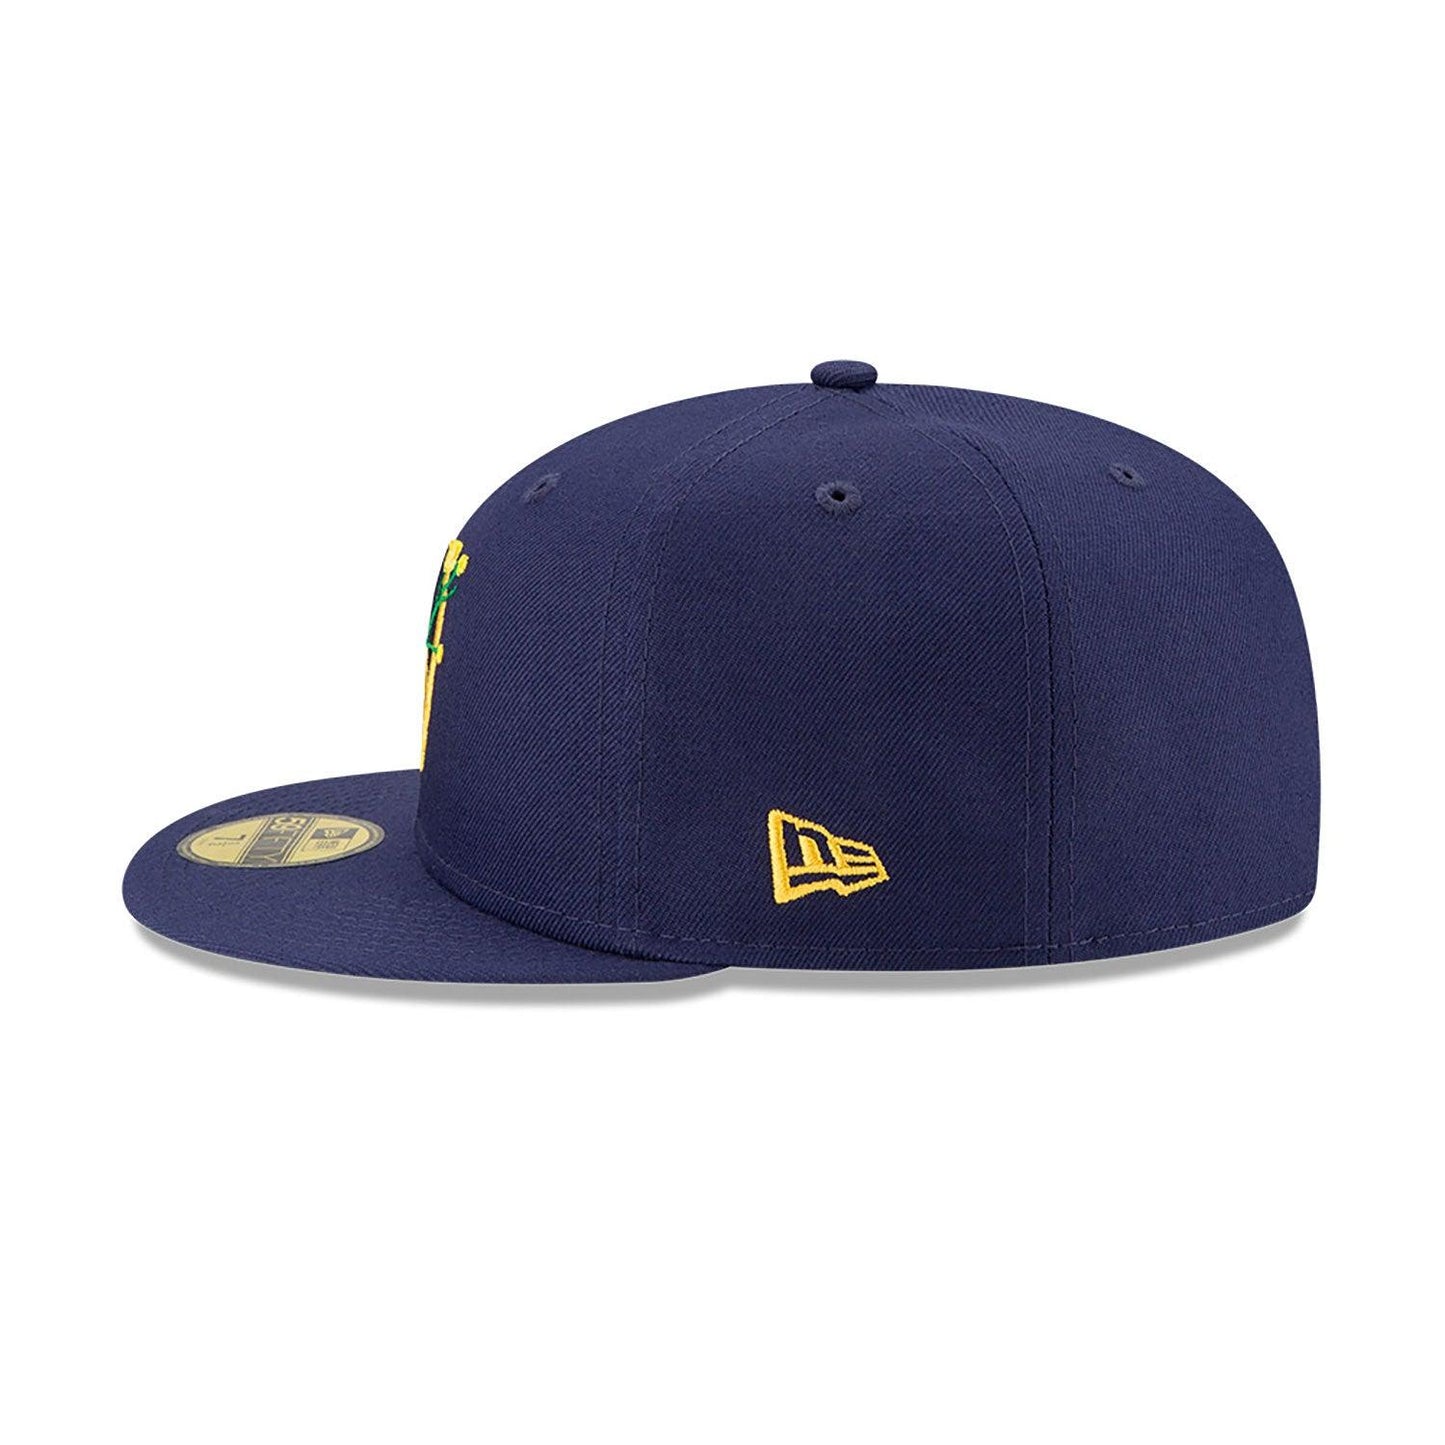 NEW ERA 59FIFTY MLB MILWAUKEE BREWERS SIDE PATCH BLOOM NAVY / SOFT YELLOW UV FITTED CAP